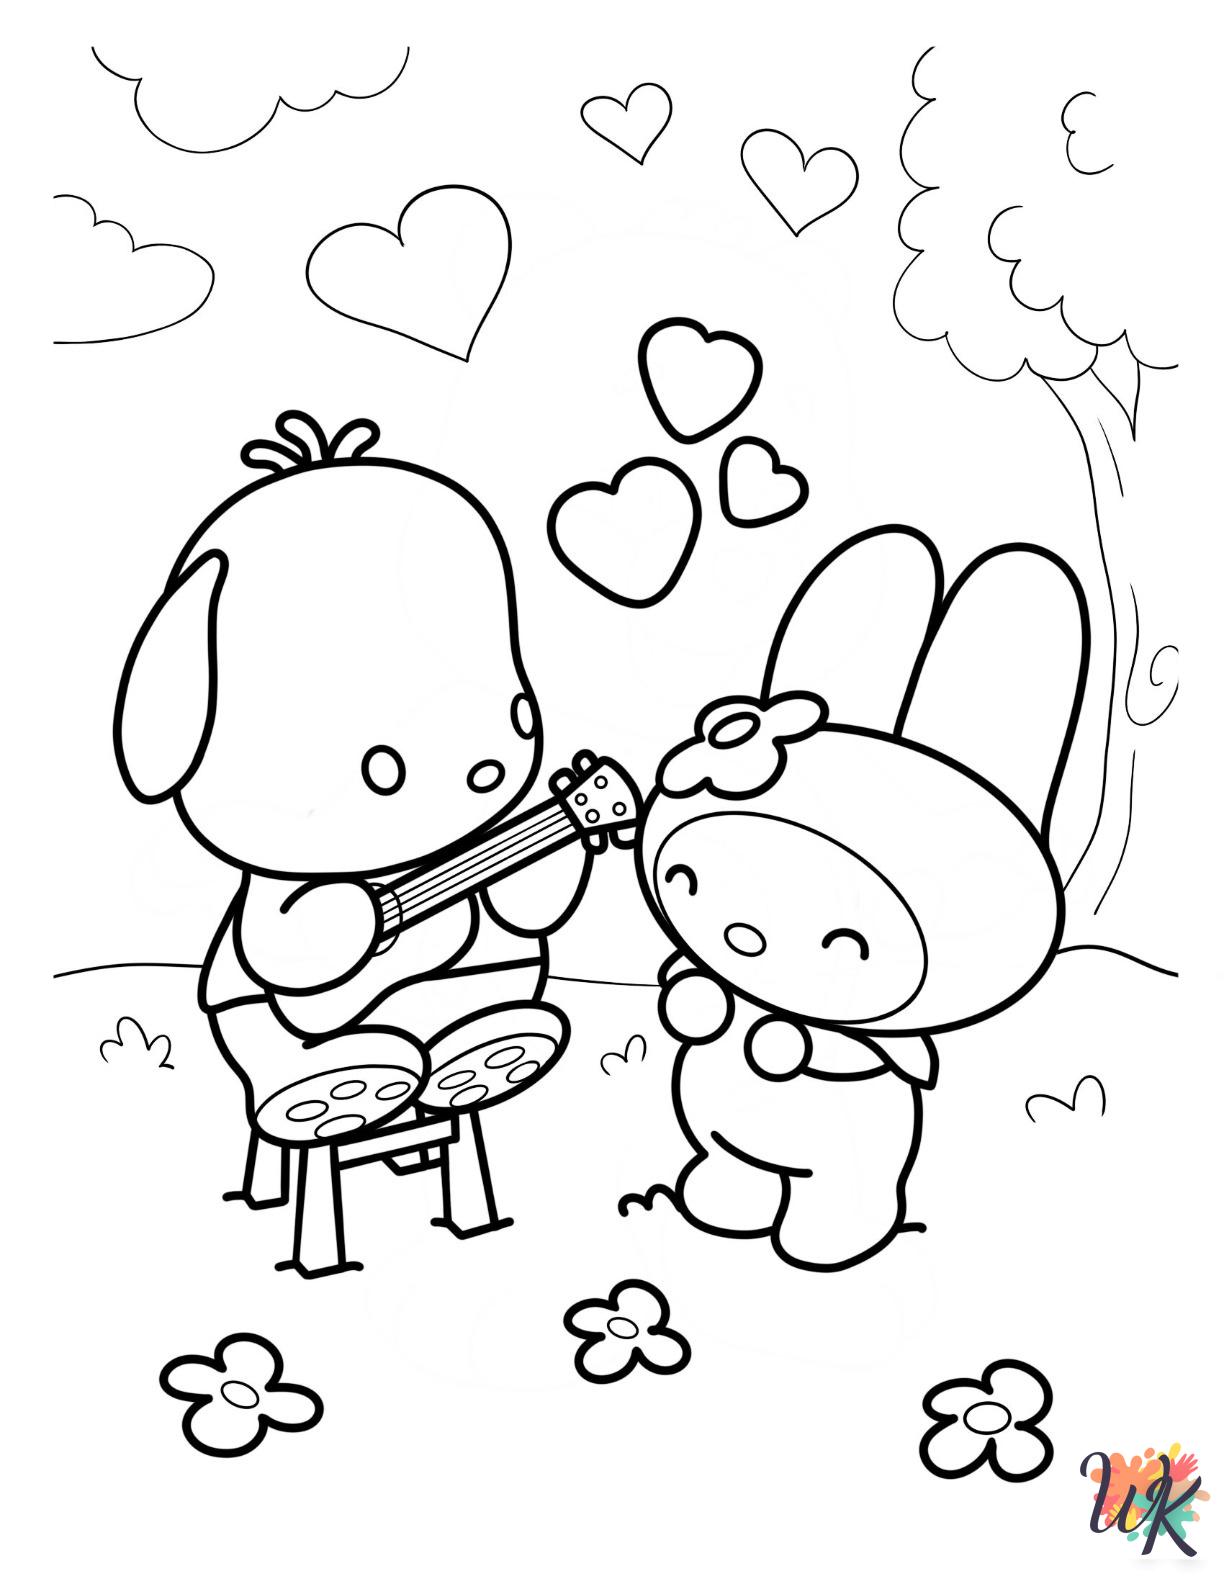 Pochacco coloring pages for kids